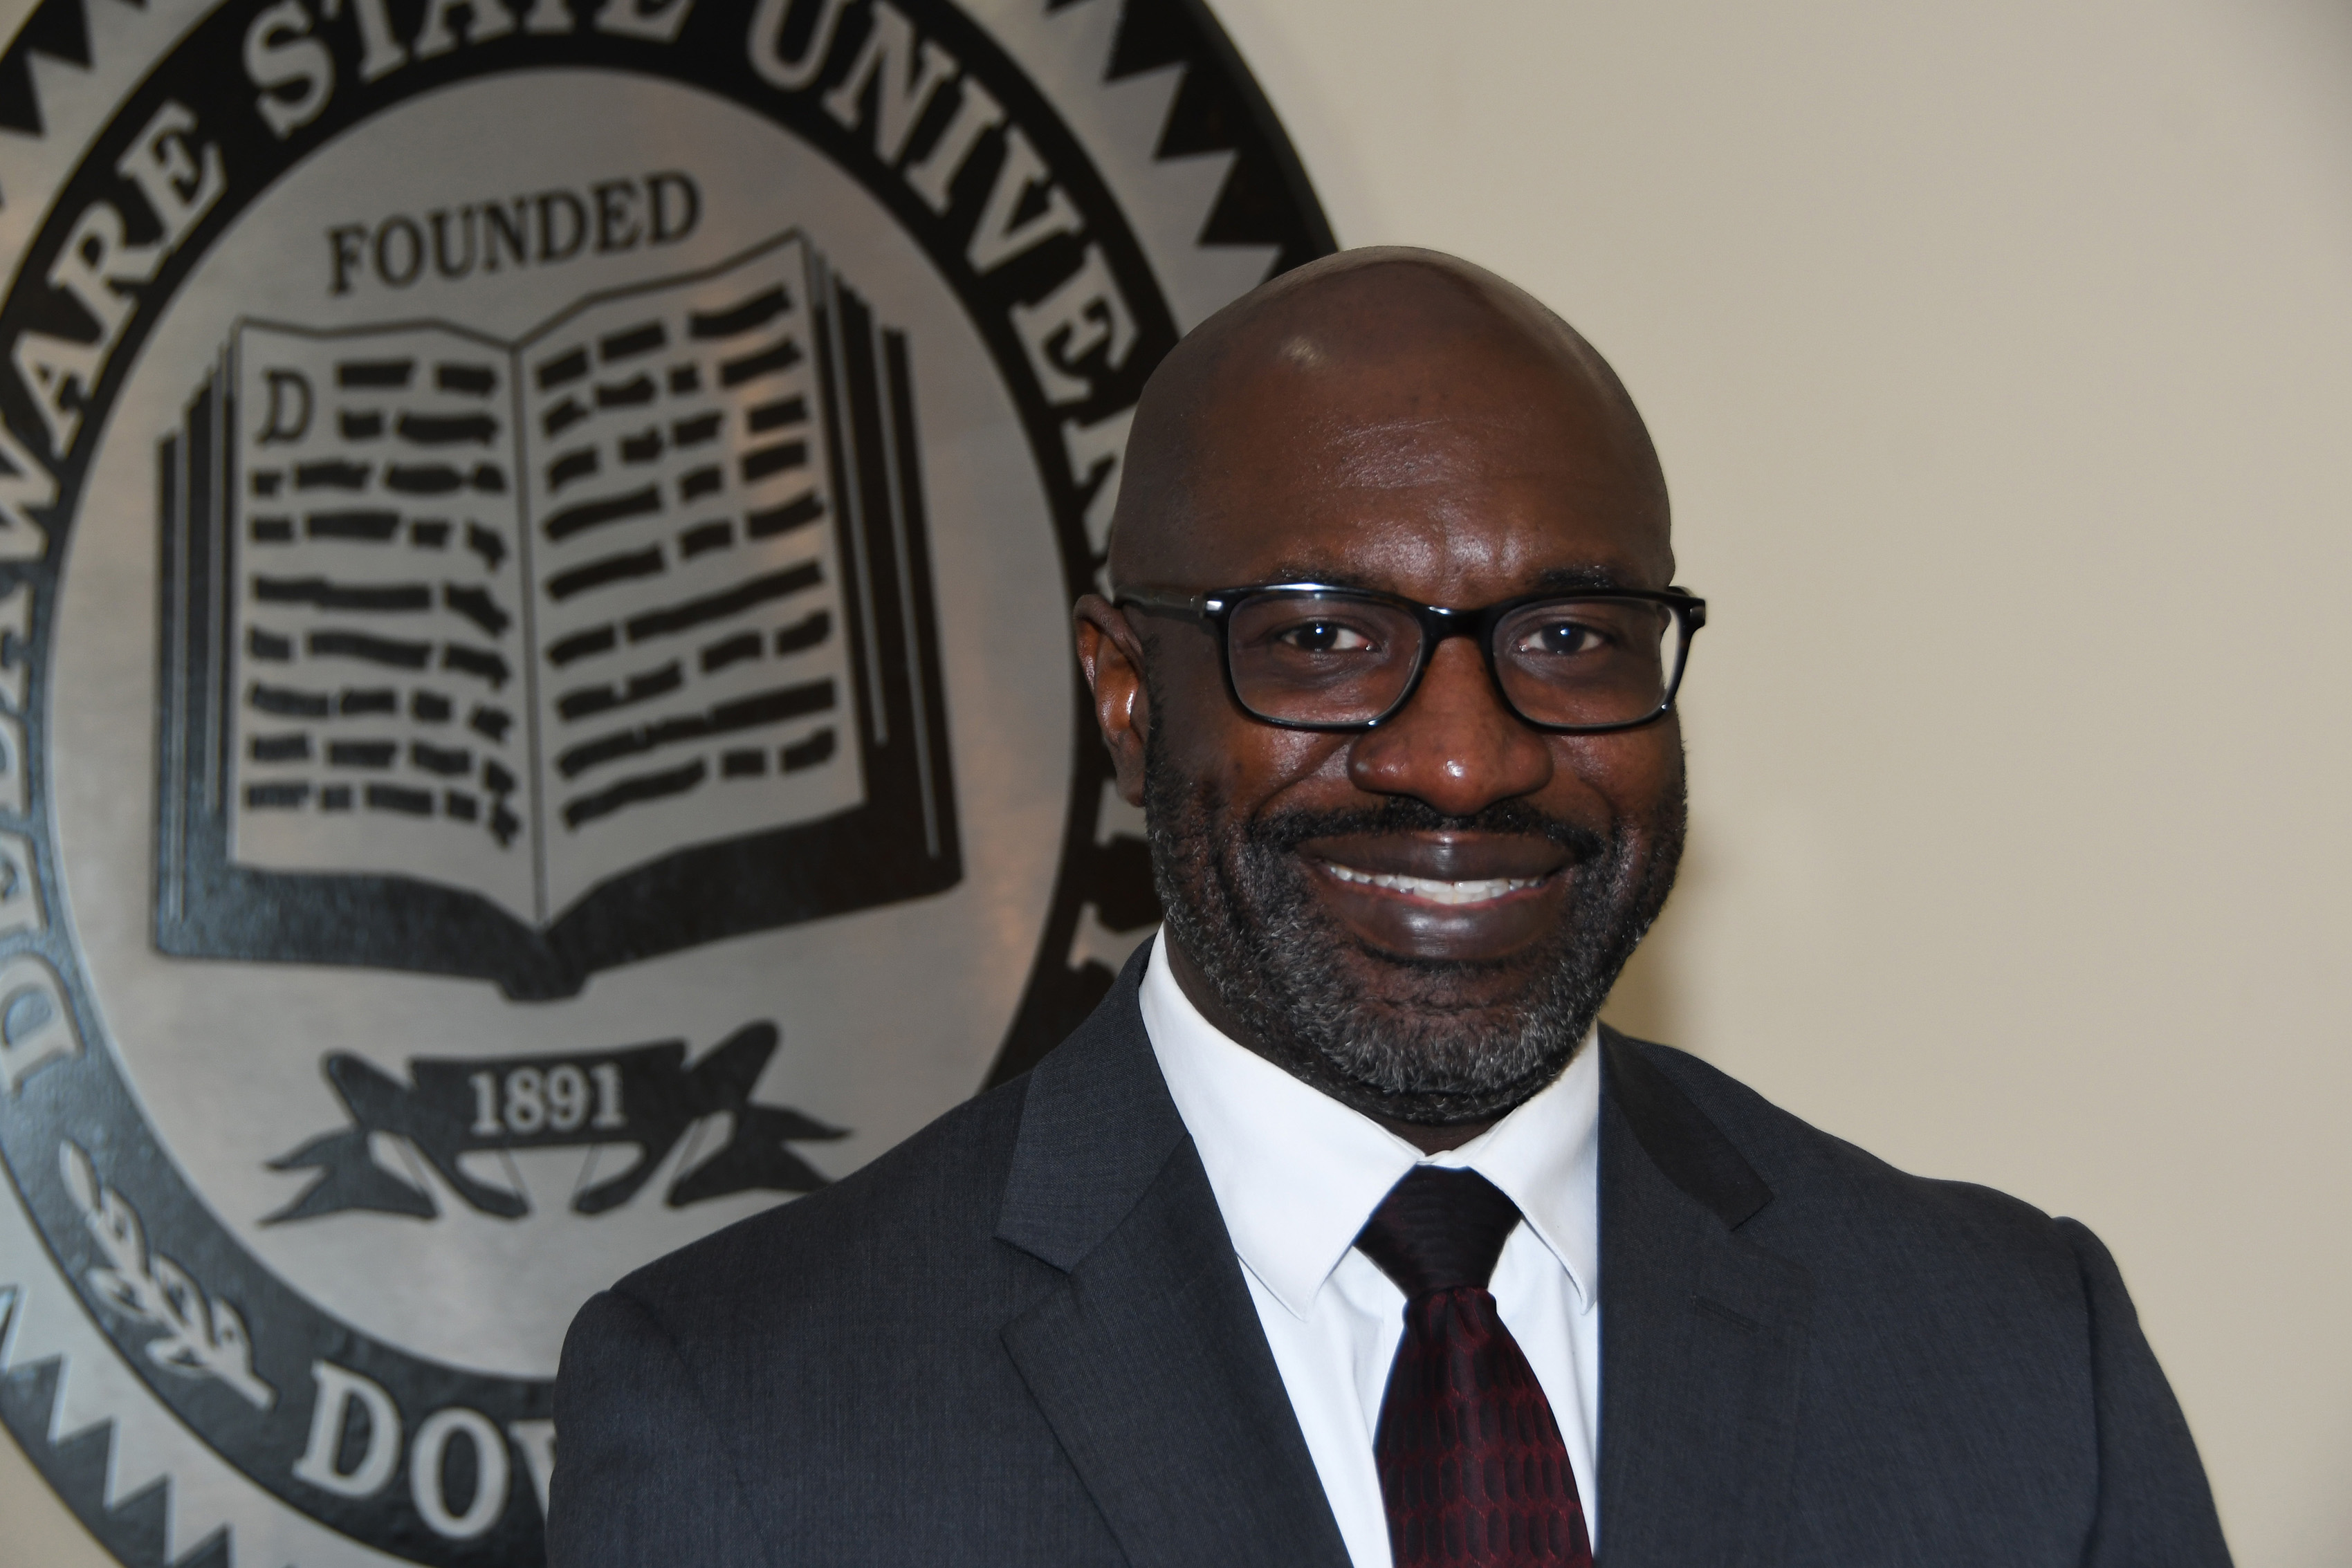 Cleon Cauley, the University's Chief Operations Officer, has been named along with Del State alumna and State Rep. Stephanie Bolden as the Co-Chairs of the newly established African American Task Force to study inequities in communities of people of color in Delaware.